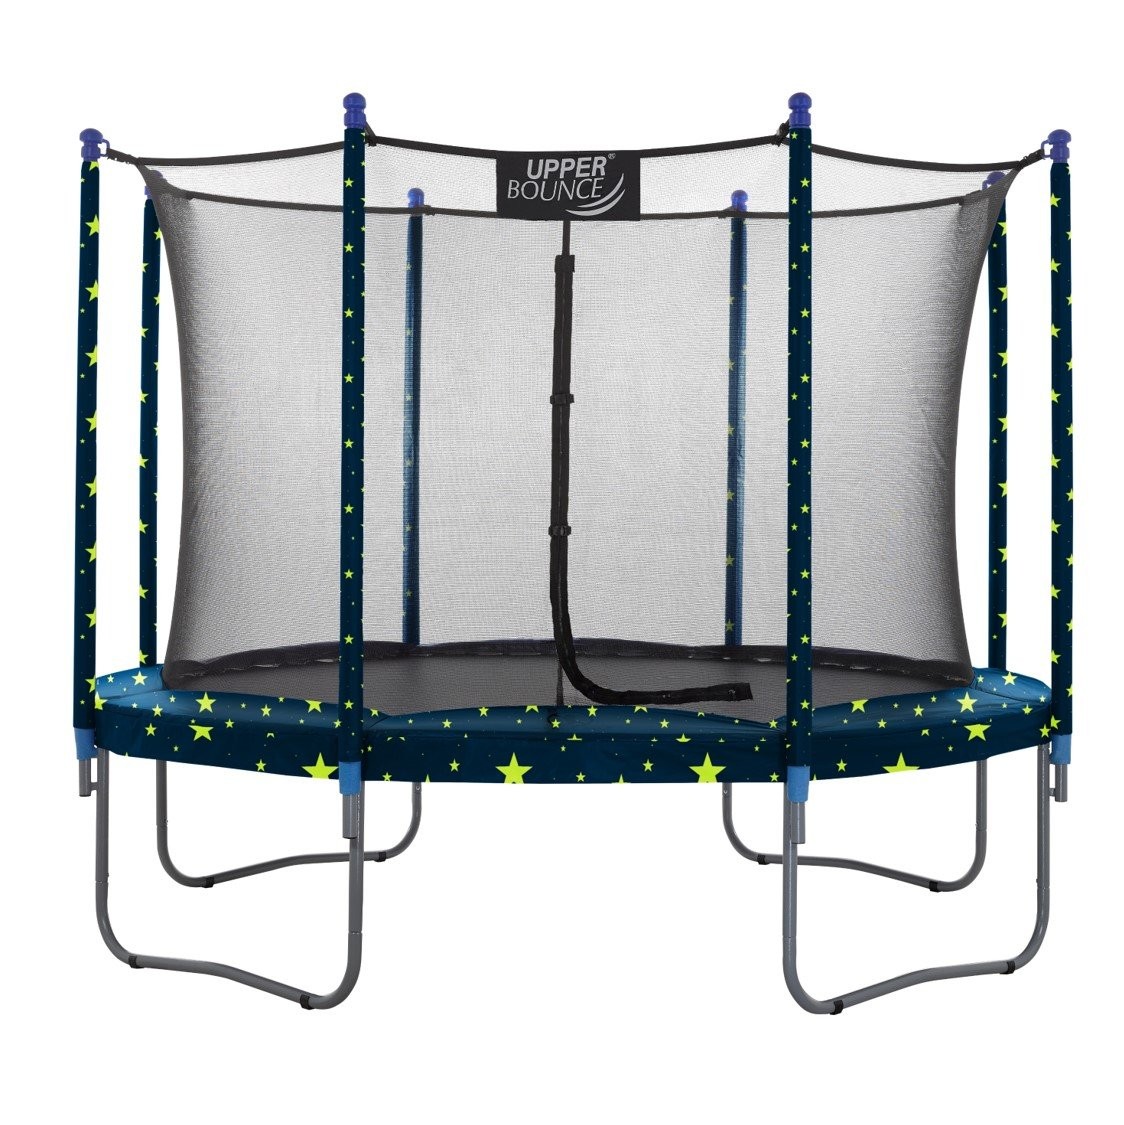 10Ft Large Trampoline and Enclosure Set | Garden & Outdoor Trampoline with Safety Net, Mat, Pad | Starry Night